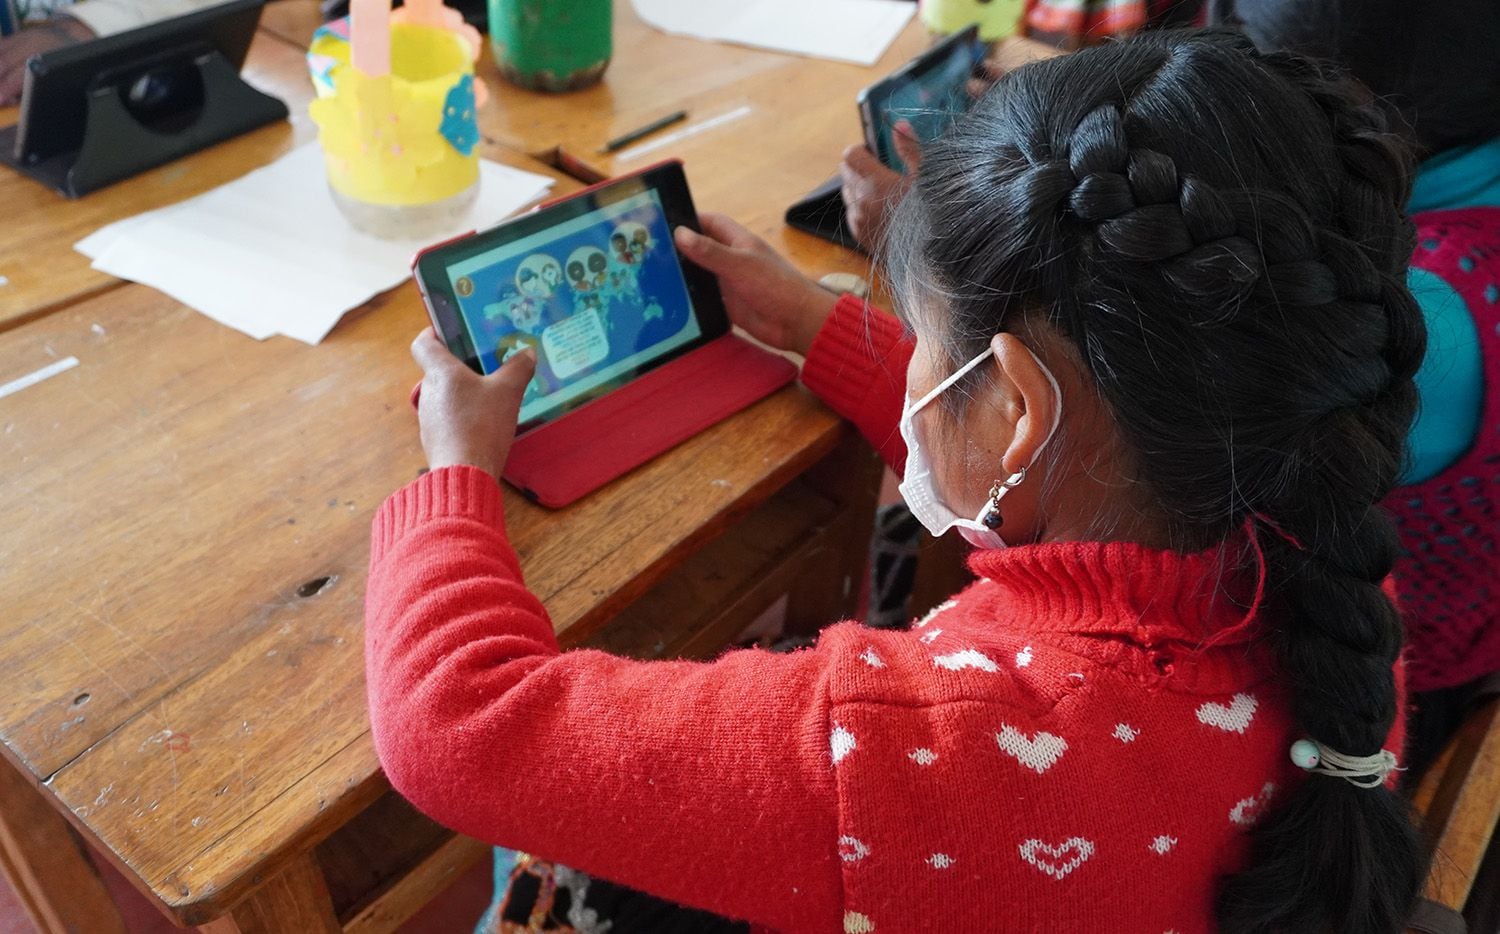 Digital education is present in different rural classrooms in Cusco.